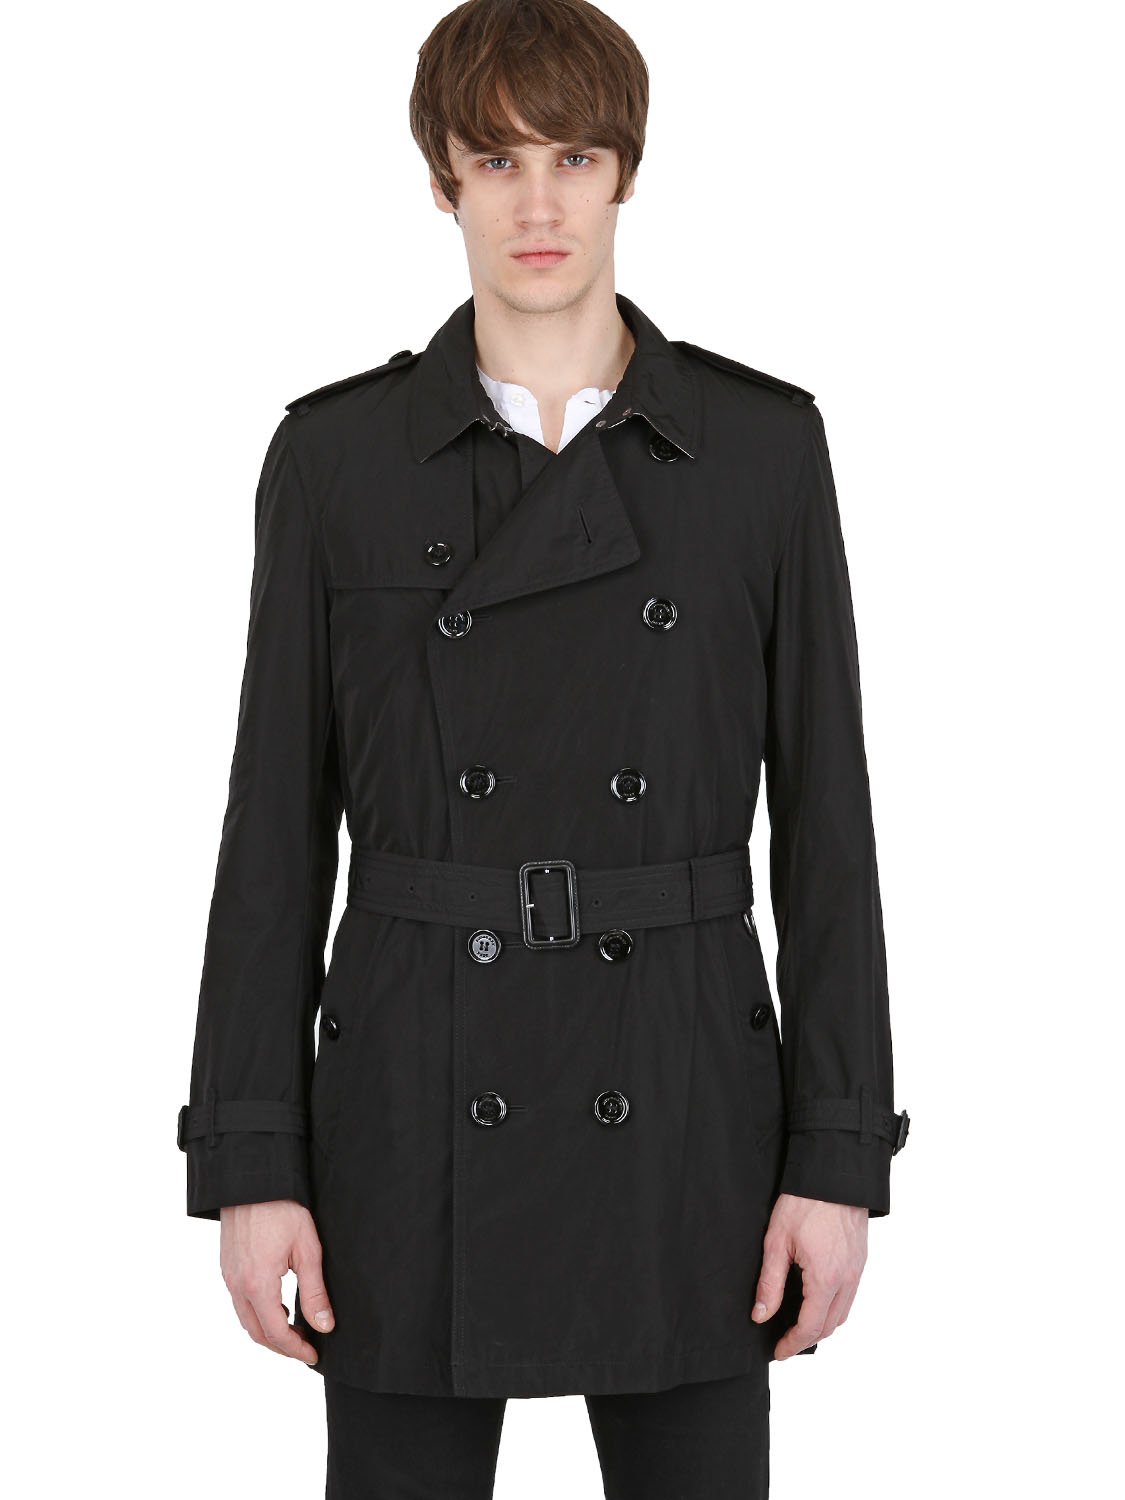 Lyst - Burberry Brit Nylon Trench Coat With Quilted Vest in Black for Men